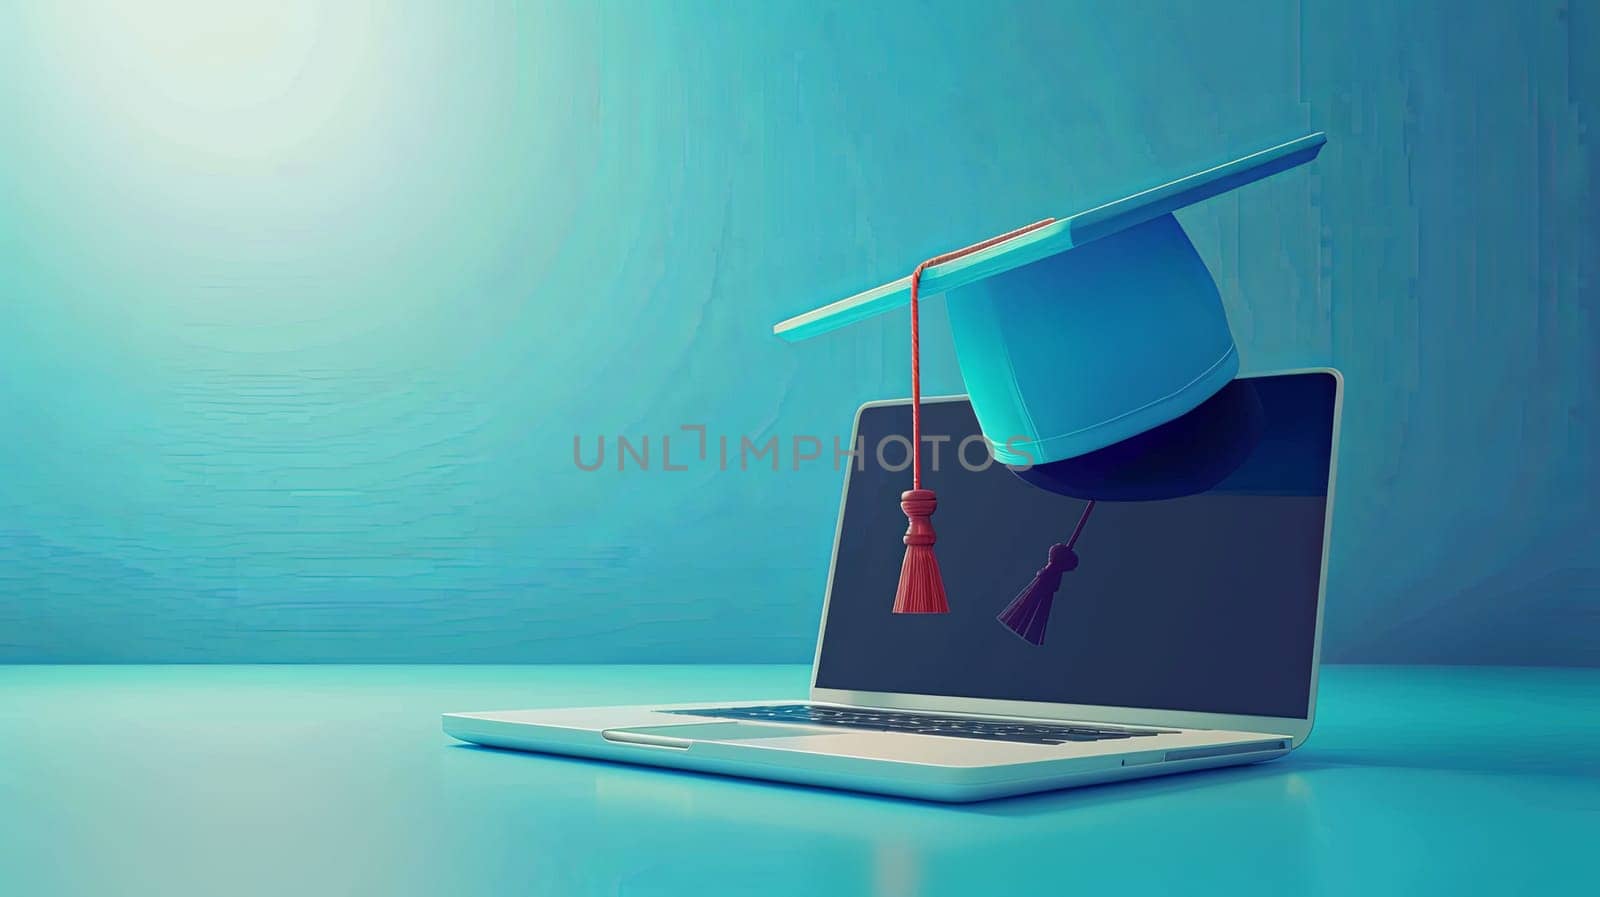 A laptop displaying an EdTech concept with a graduation cap placed on top, symbolizing online education and professional qualifications.